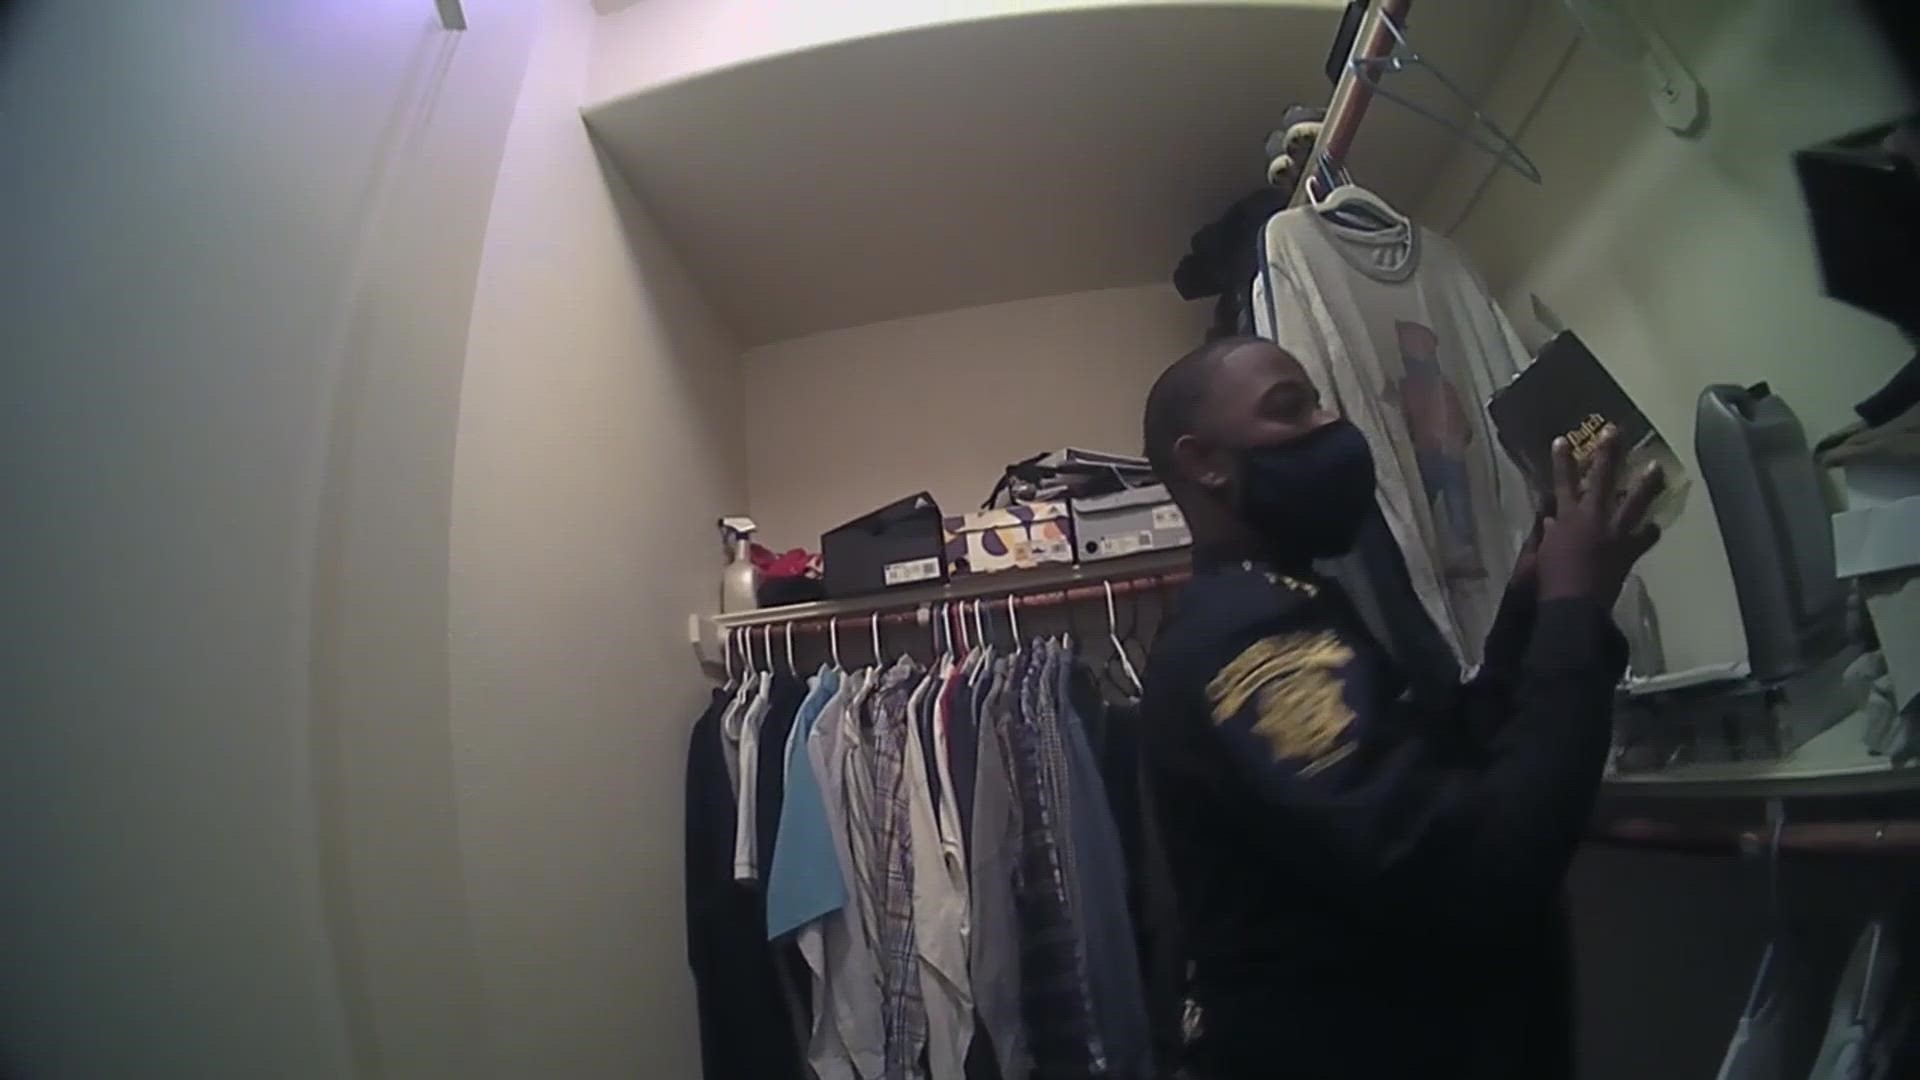 Smith County DA's Office releases of video showing alleged theft by Constable Curtis Traylor-Harris and his deputies